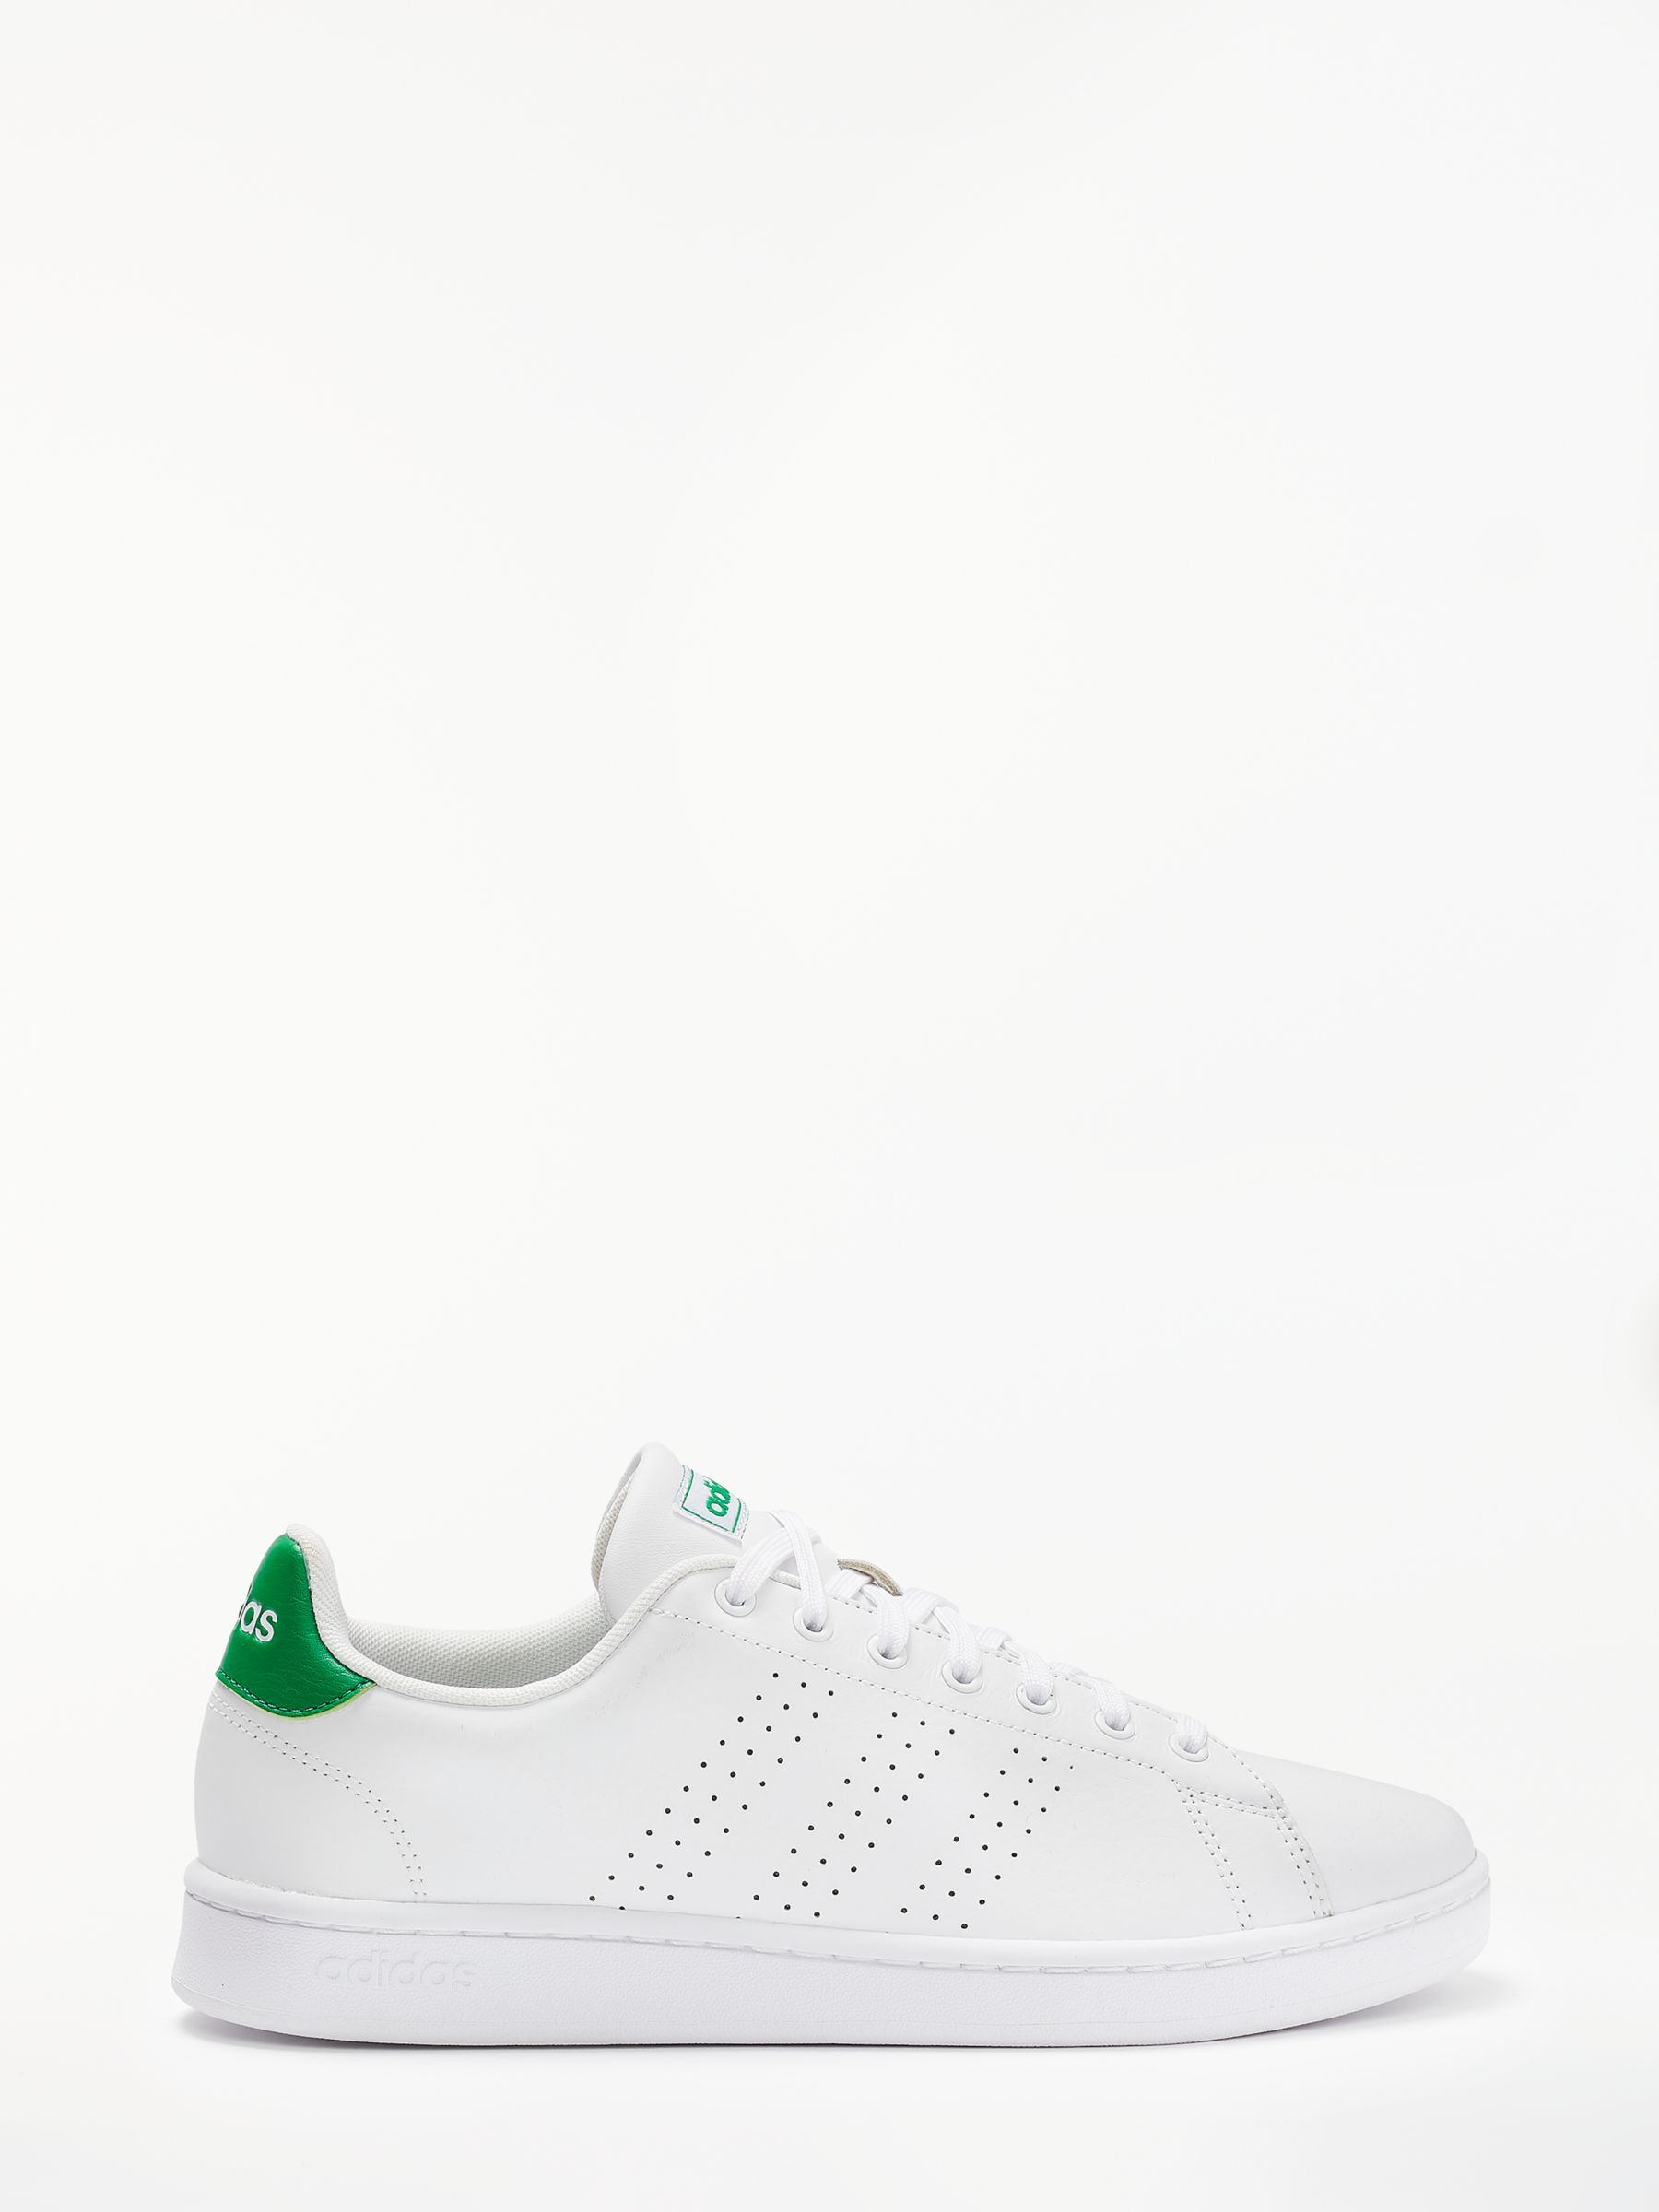 mens green and white adidas trainers